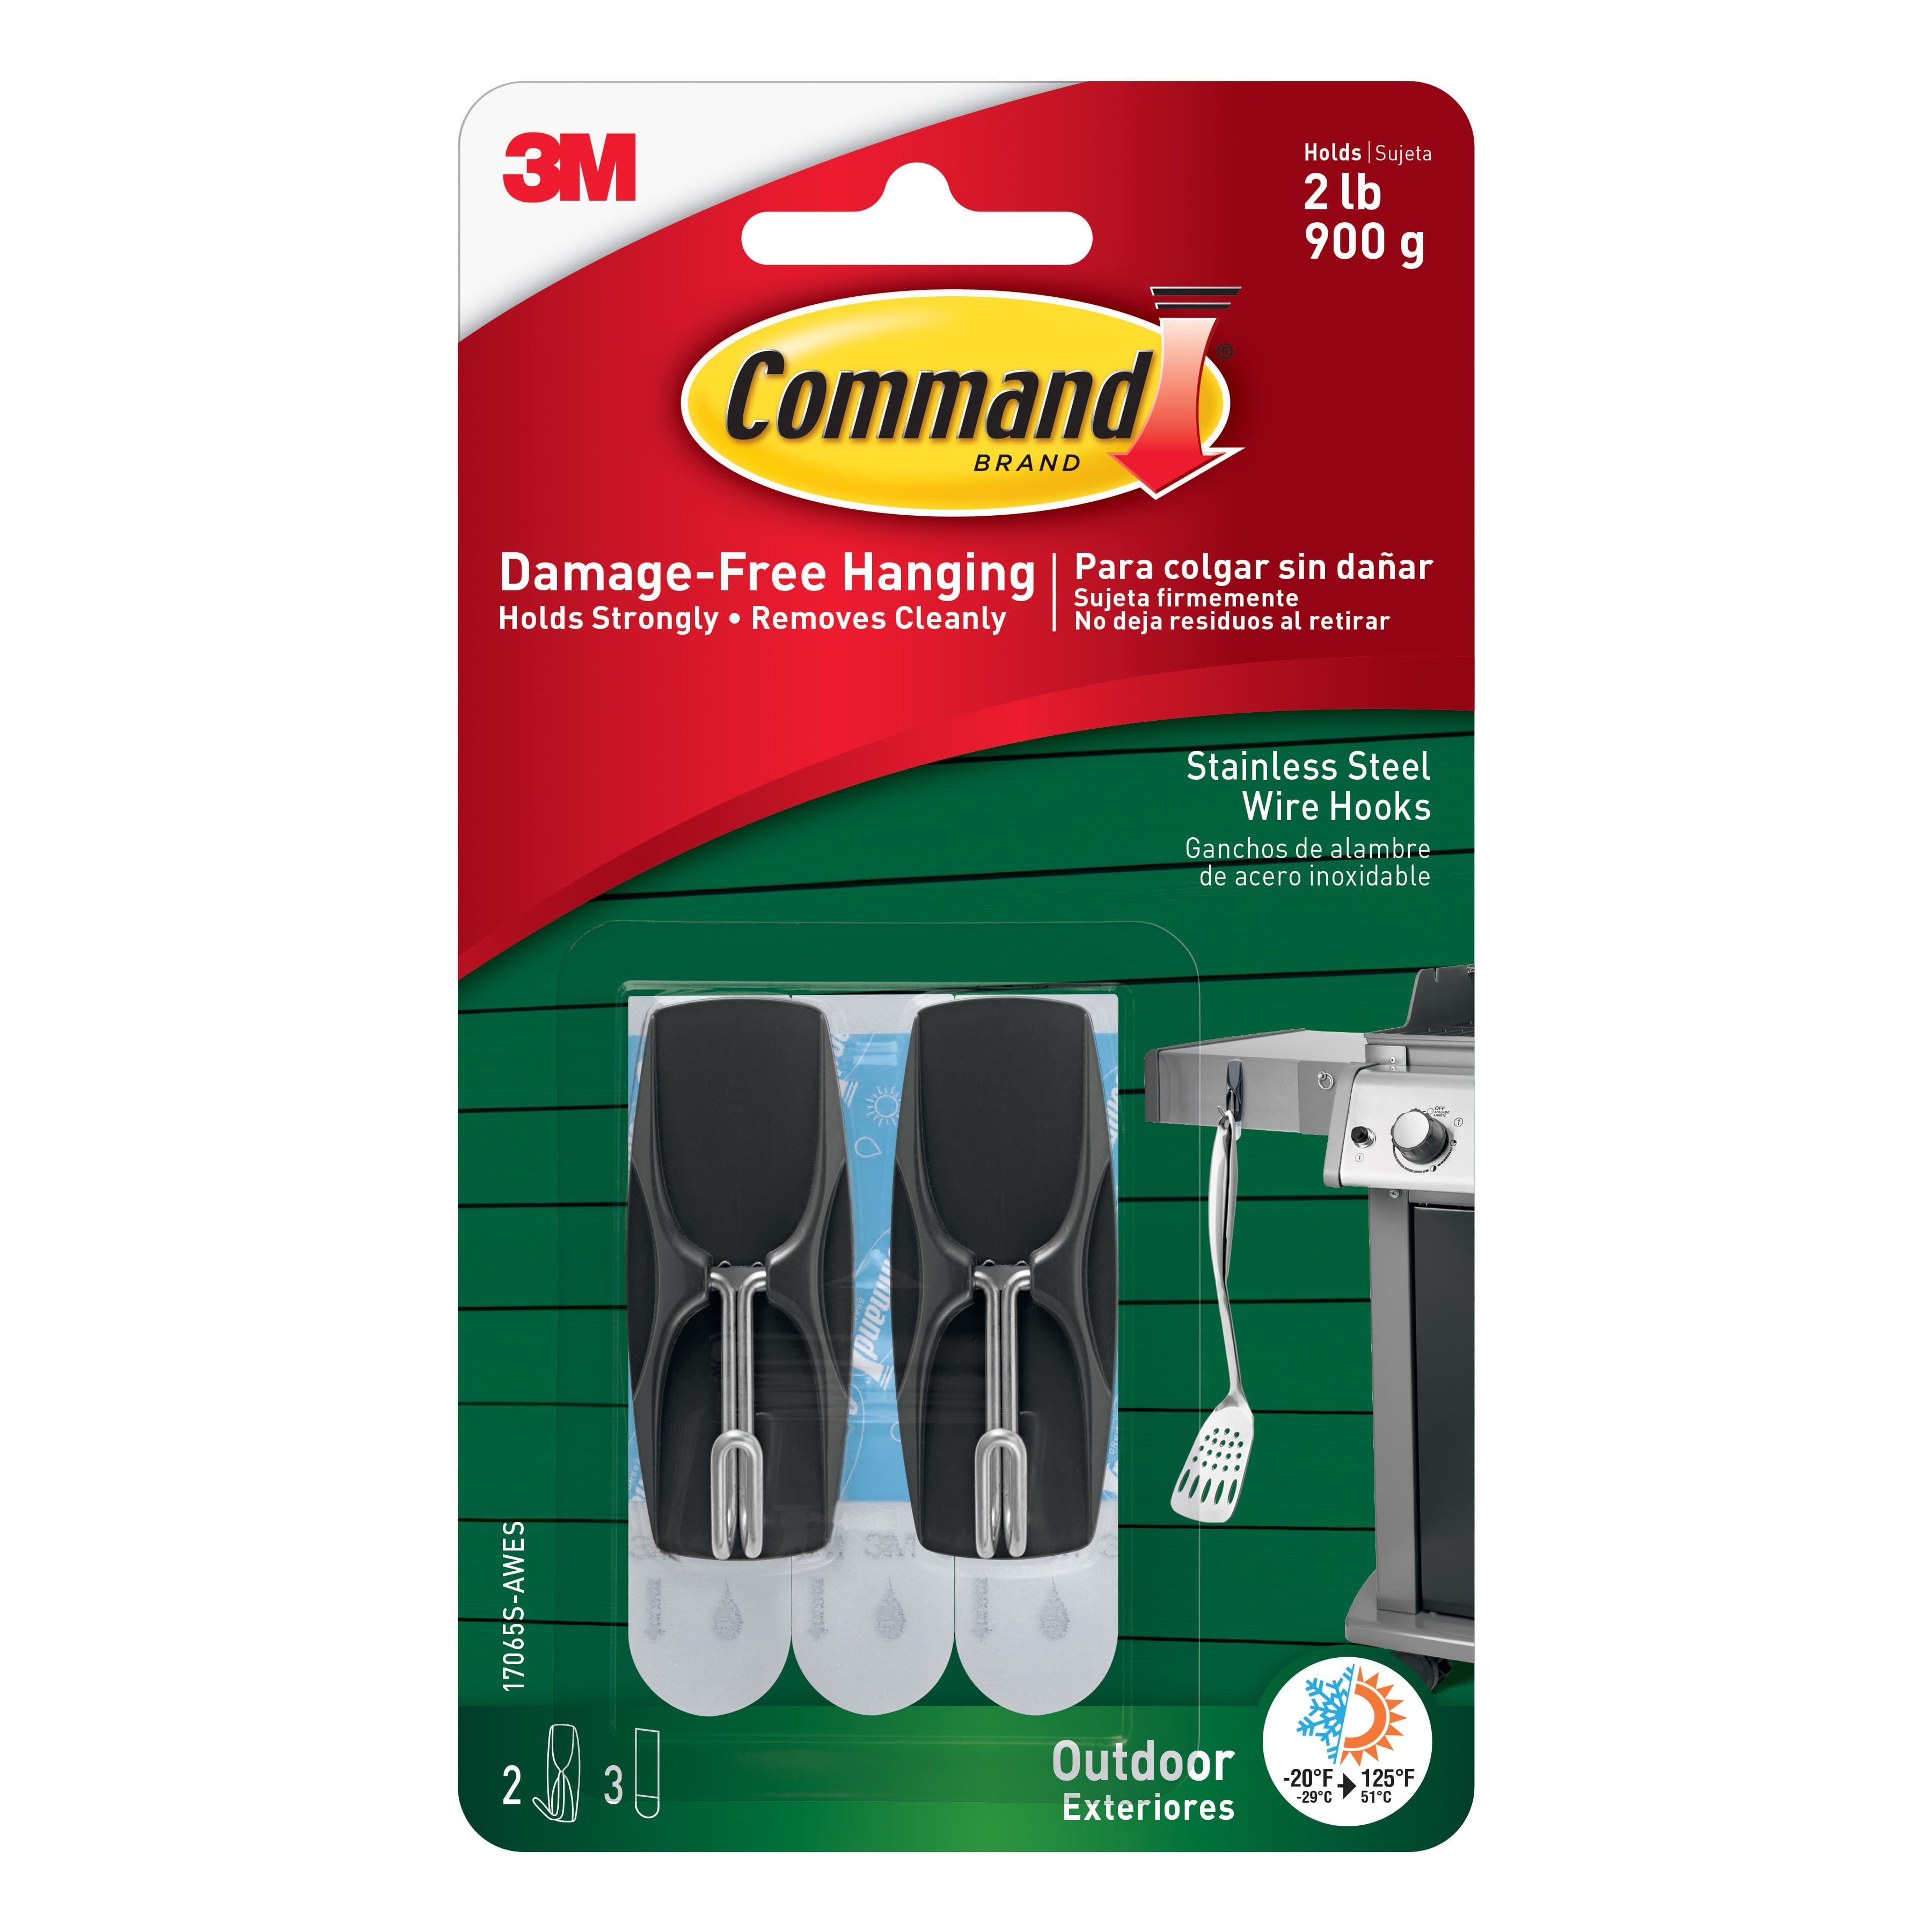 Shop for the 3M Command™ Outdoor Stainless Steel Wire Hooks at